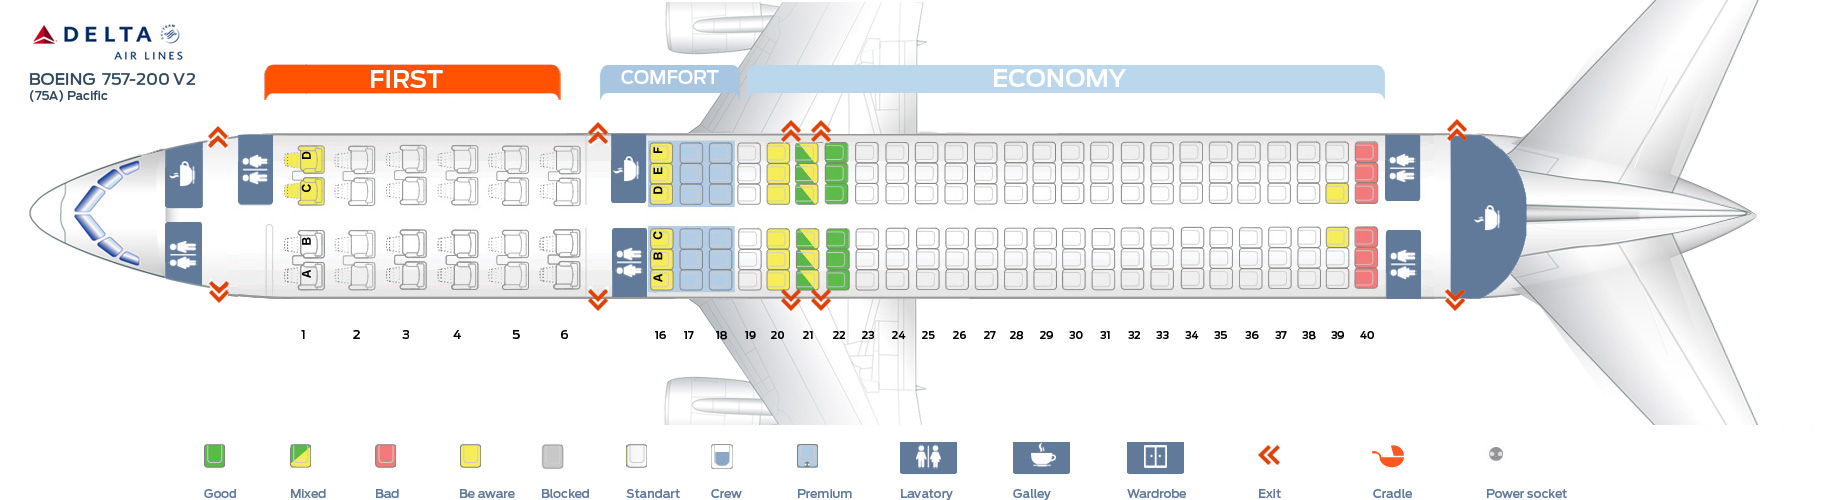 Delta 752 Seating Chart